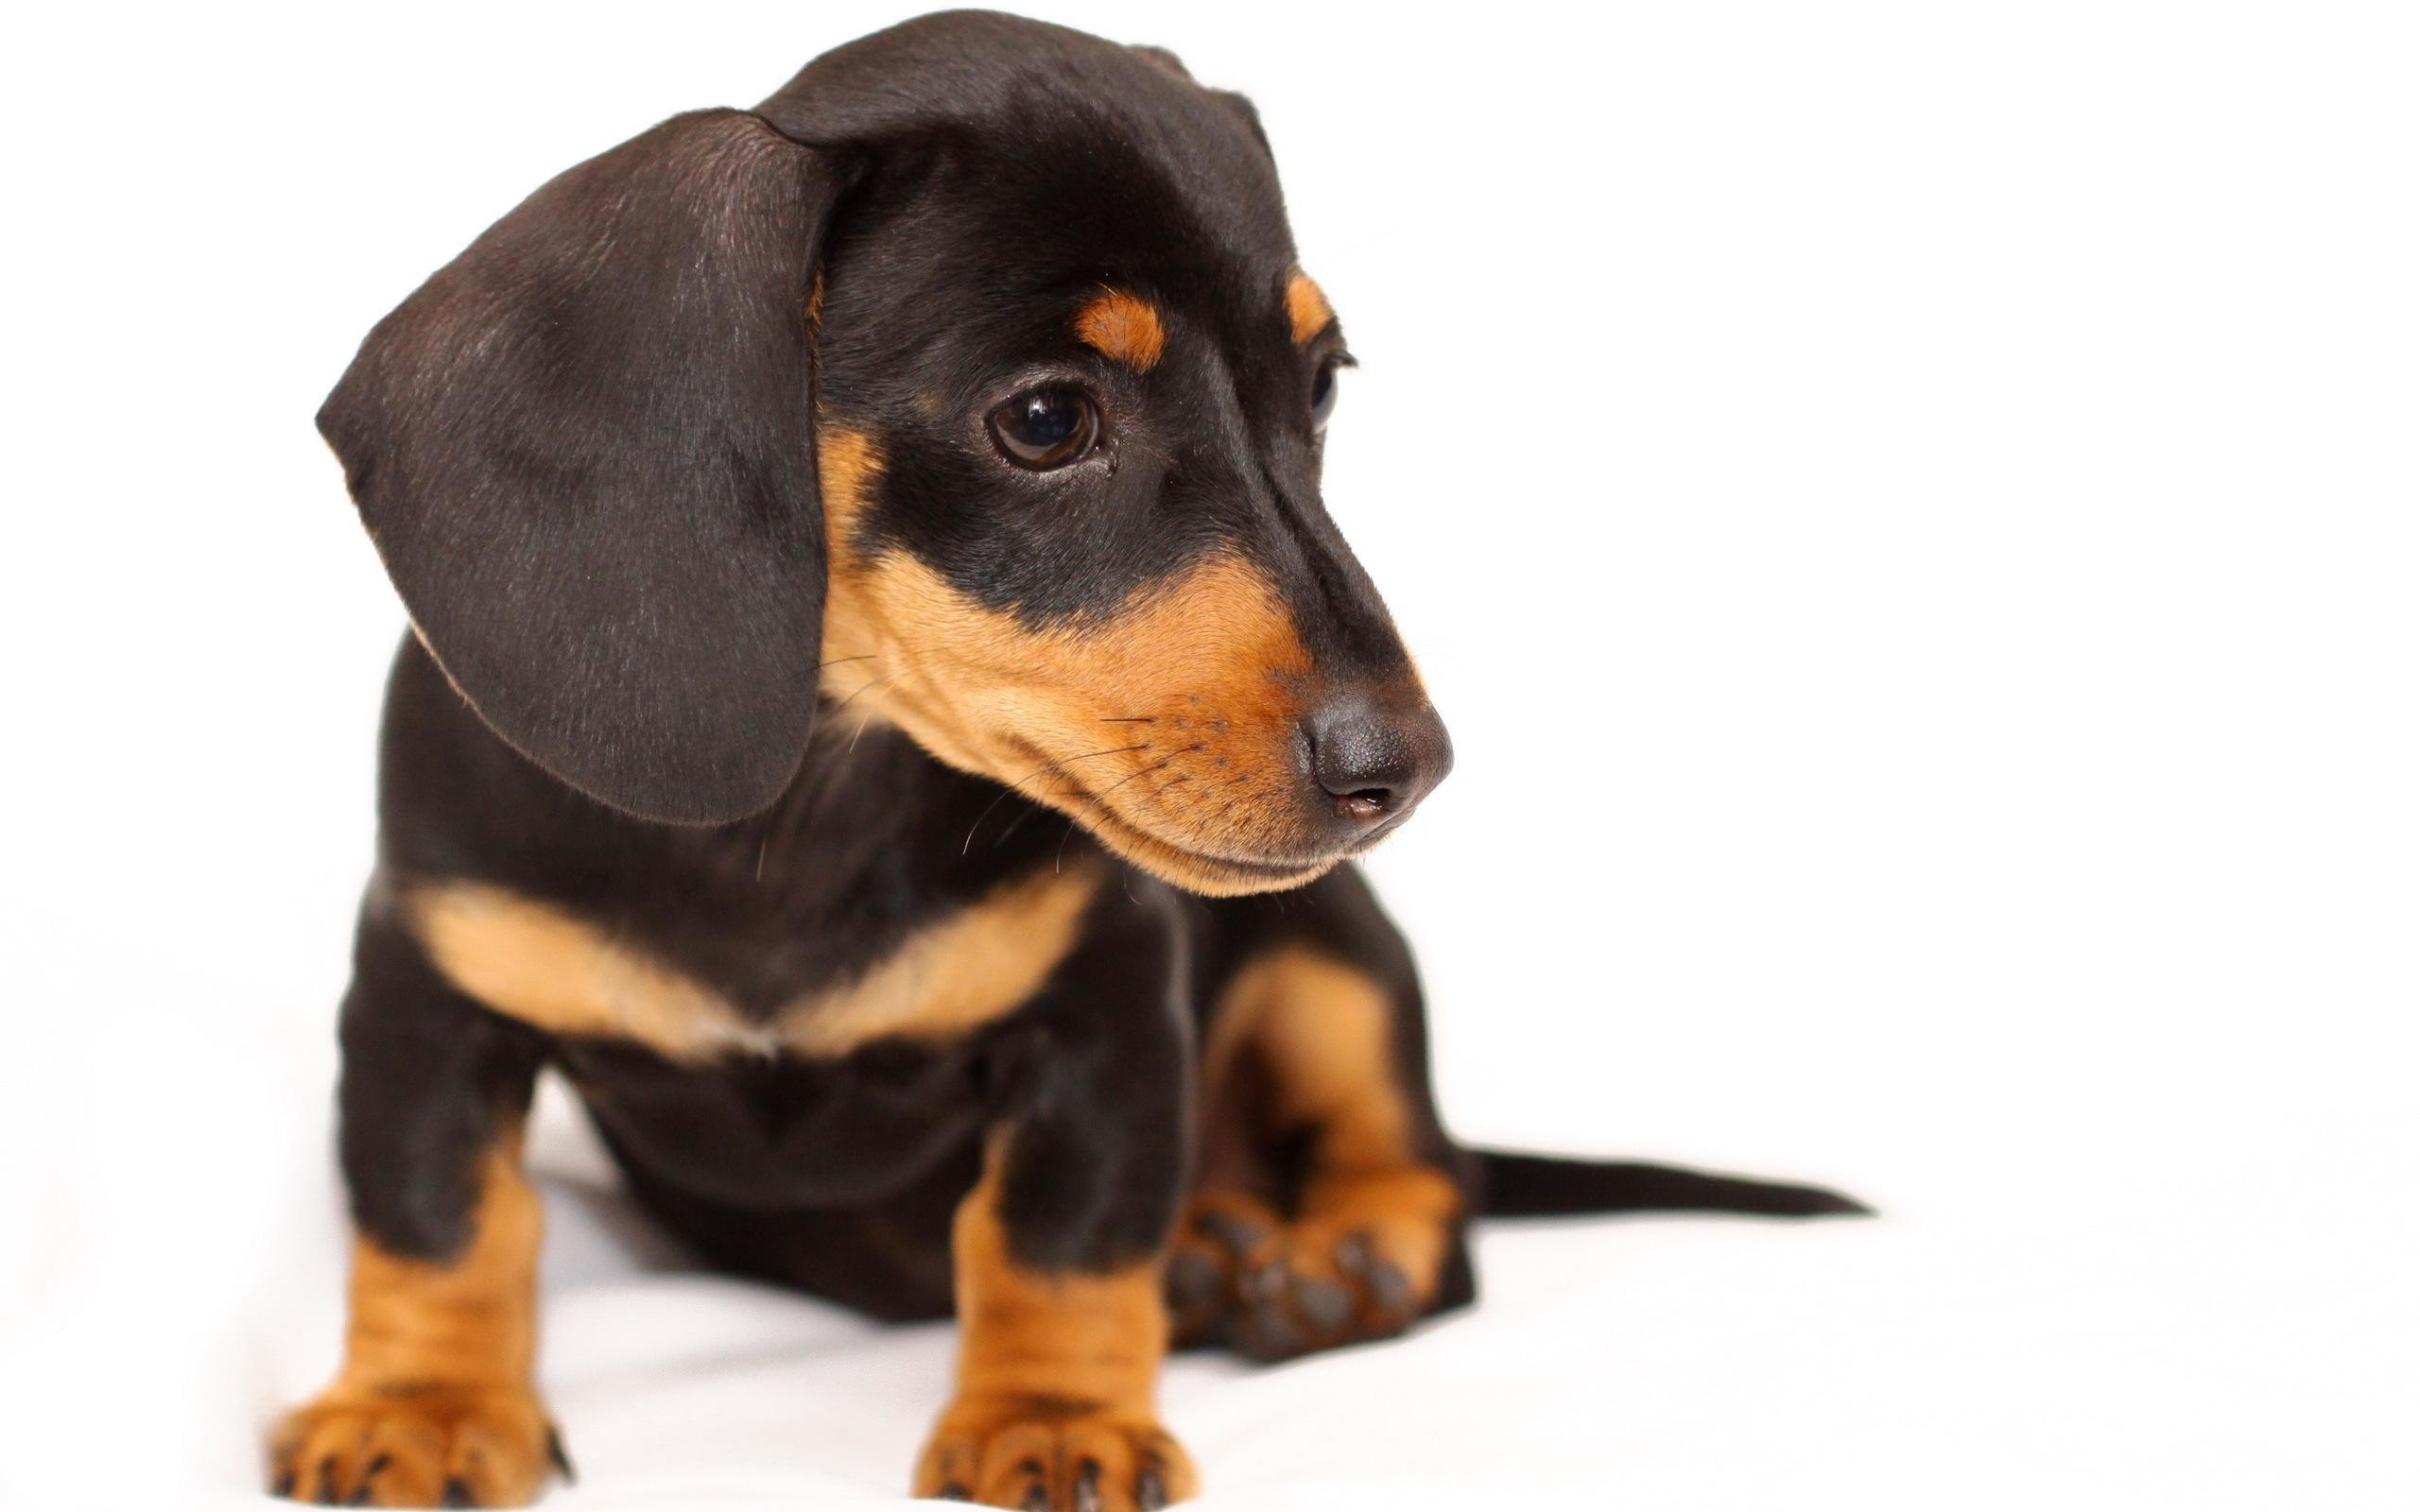 2560x1600 Related Wallpapers. Dachshund Puppy